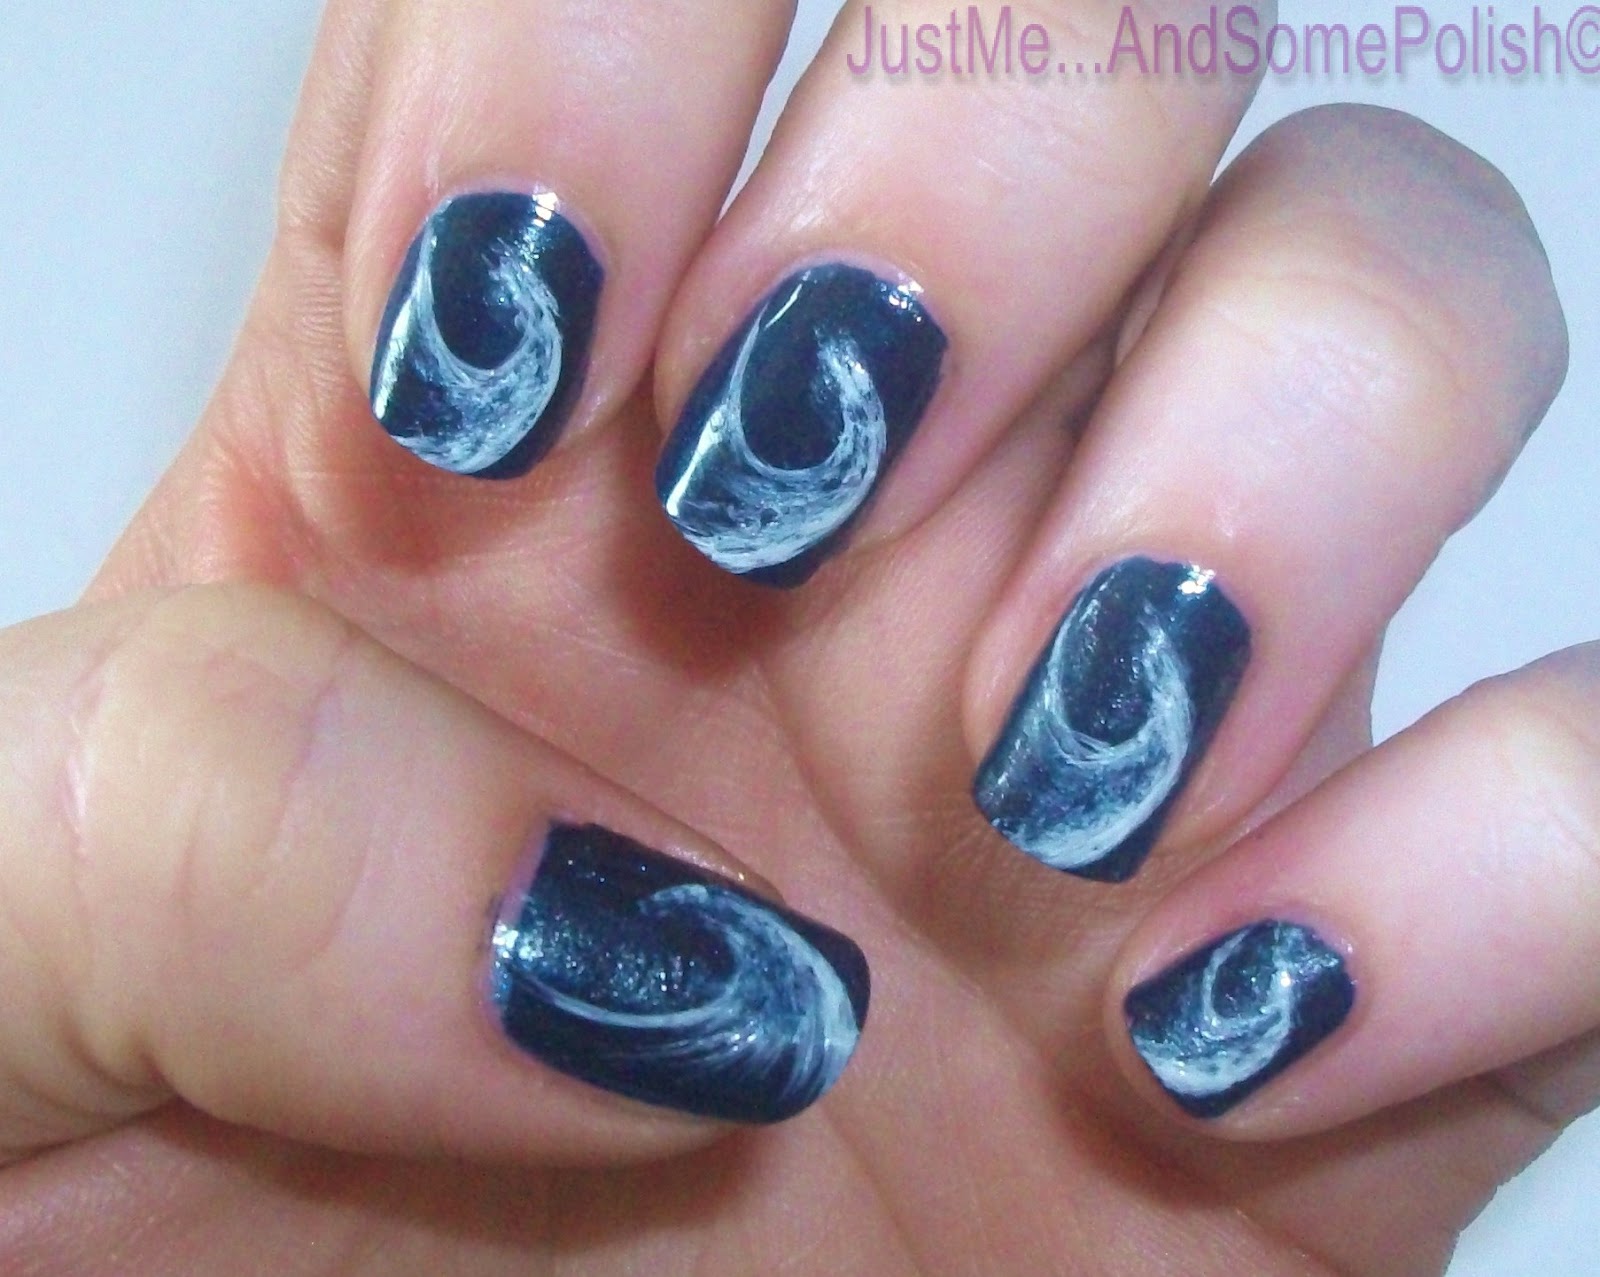 nail design with a wave